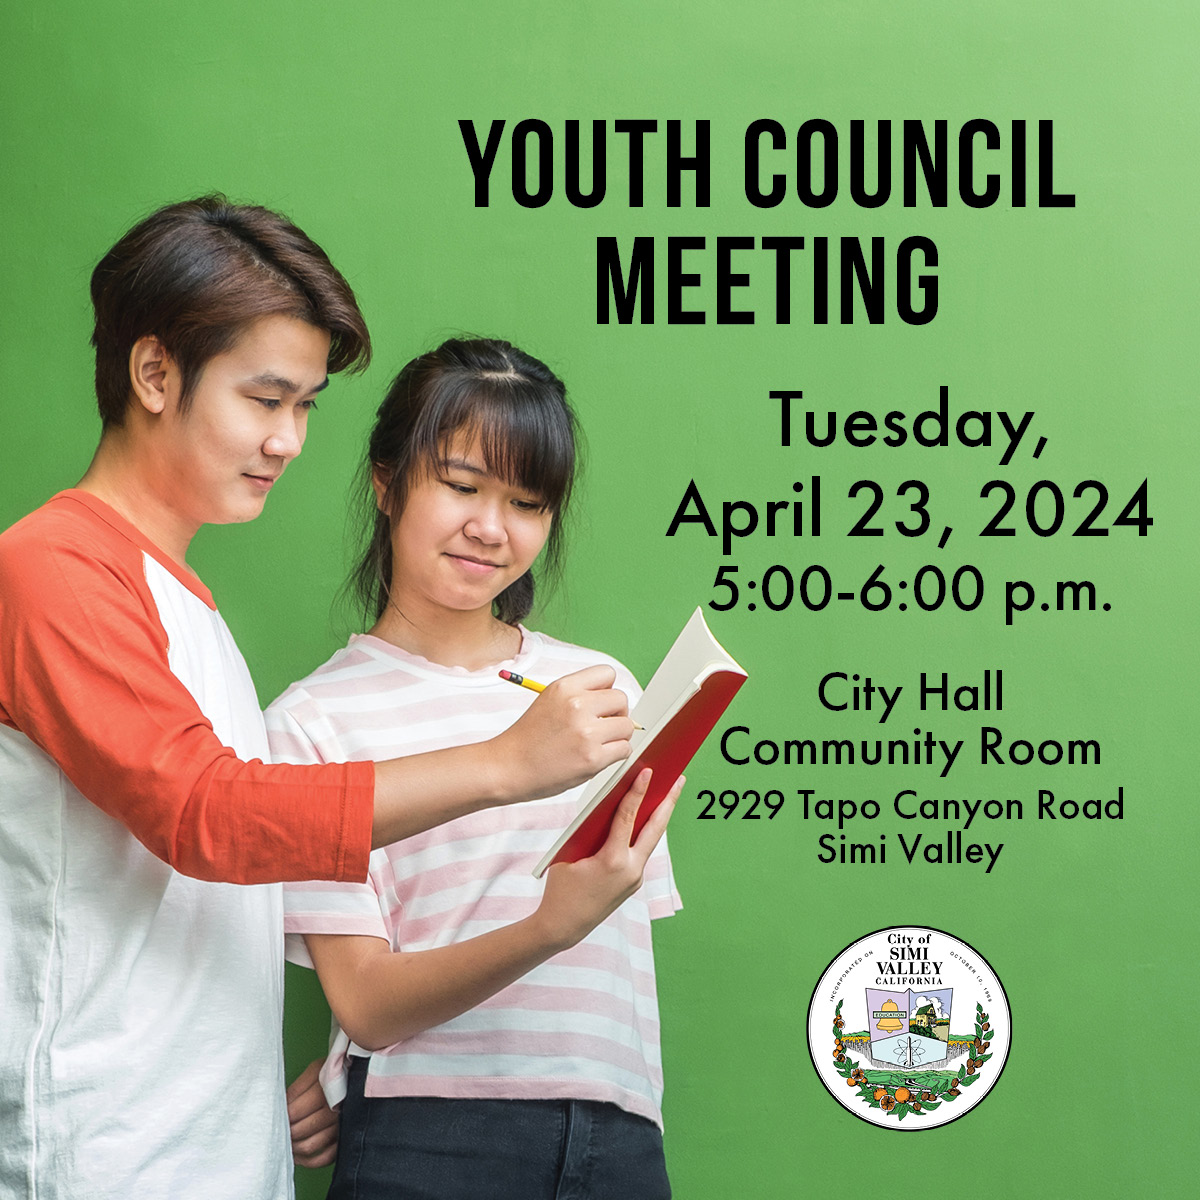 Youth Council Meeting - Special Meeting Date 5:00 p.m. - 6:00 p.m. City Hall Community Room 2929 Tapo Canyon Road, Simi Valley